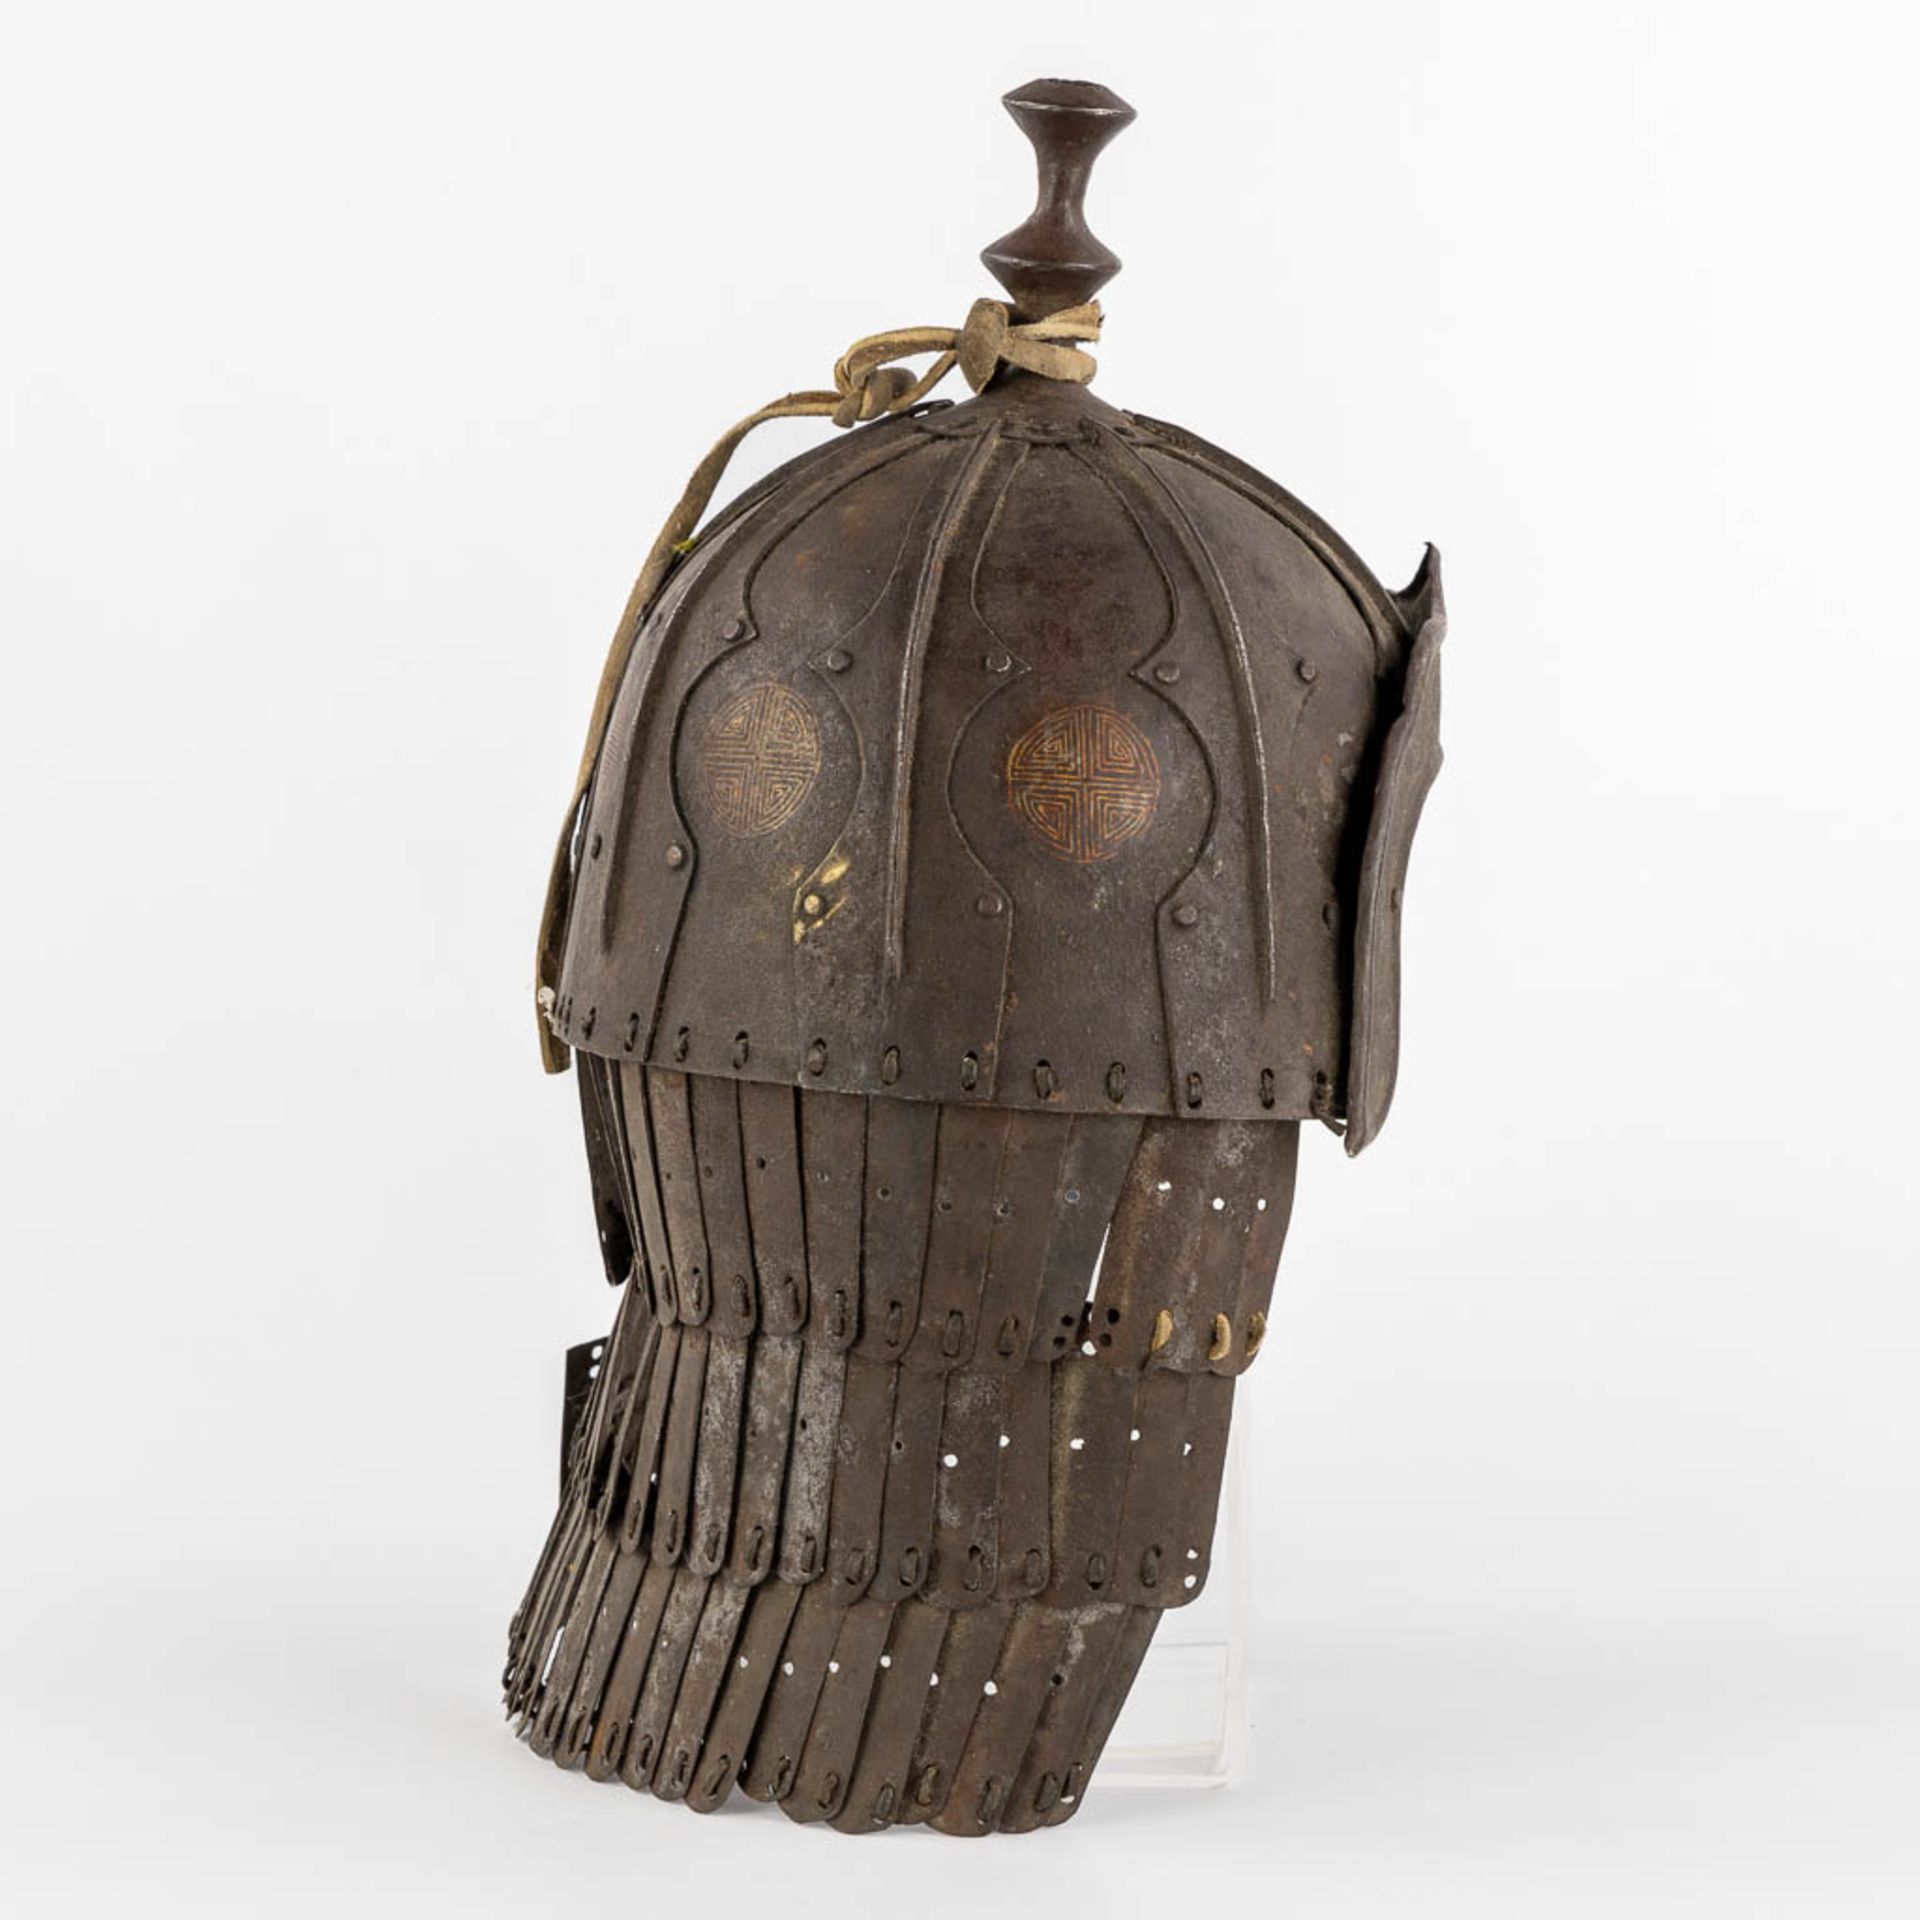 A Tibetan military helmet, iron and leather. 18th/19th C. (L:20 x W:24 x H:42 cm) - Image 6 of 11